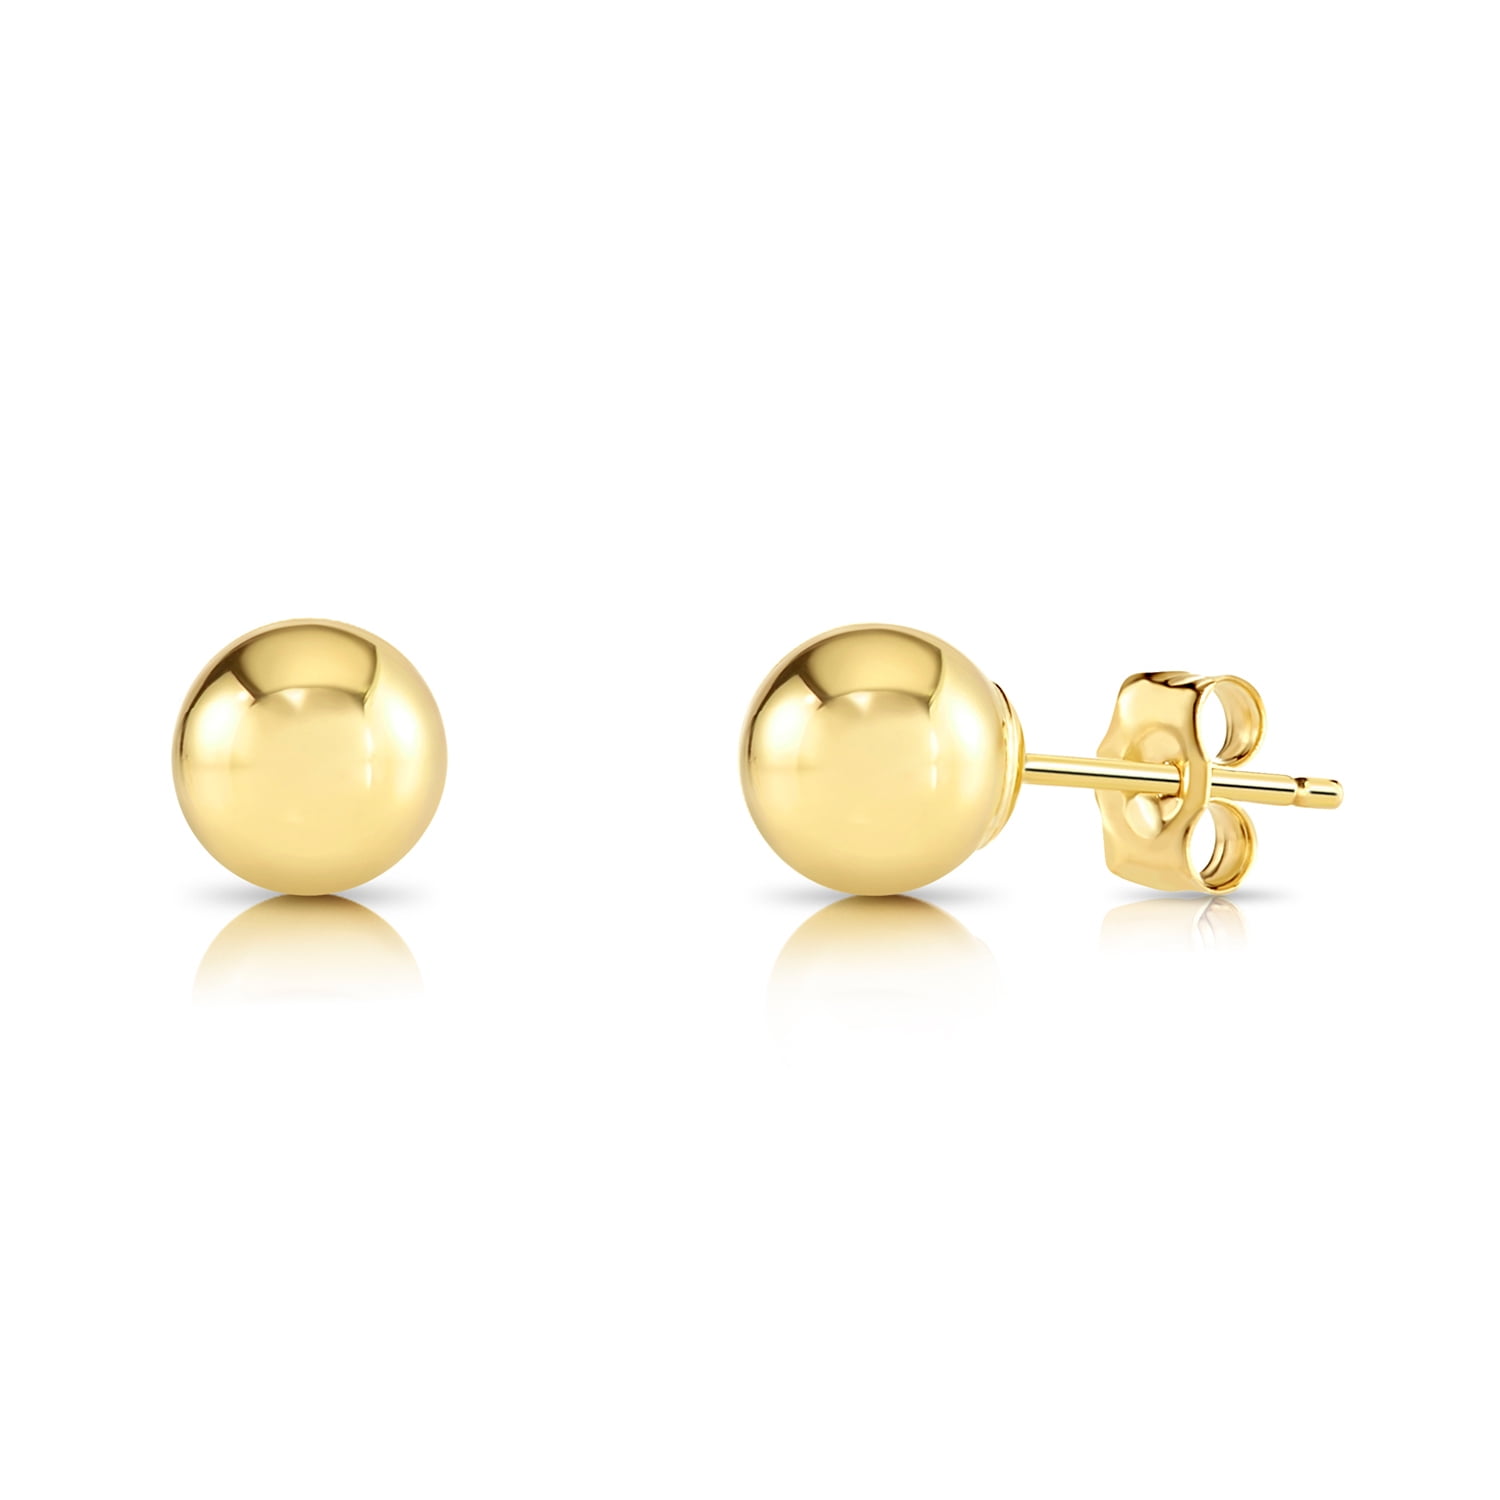 Reversible 4mm Polished Ball Screw Back Earrings in 14k Yellow Gold - The  Black Bow Jewelry Company